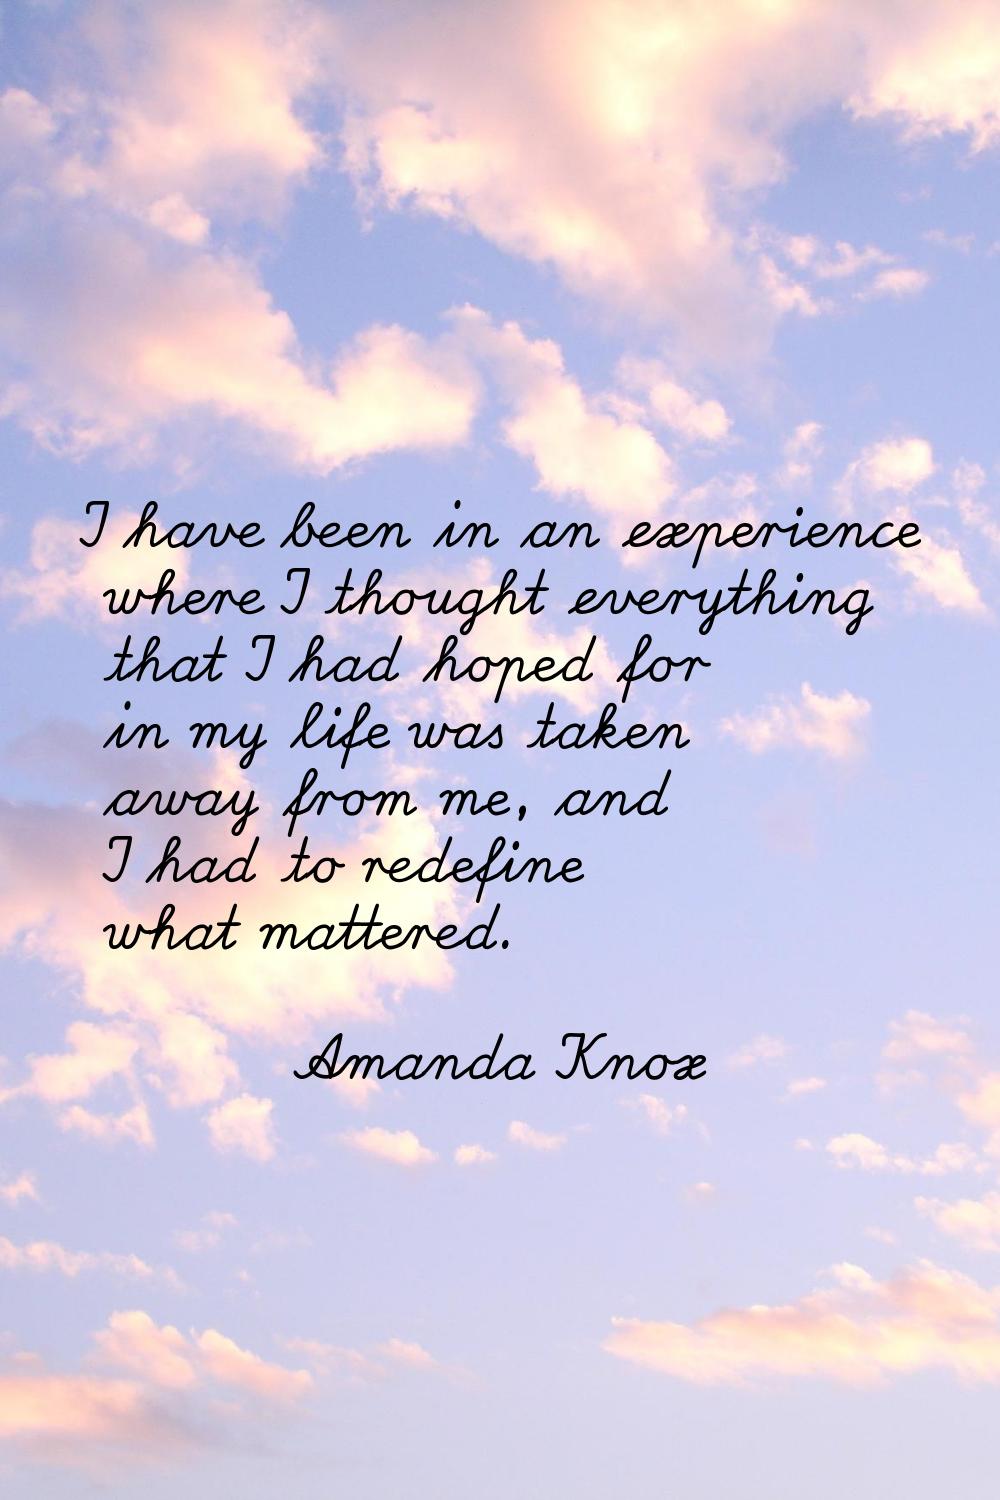 I have been in an experience where I thought everything that I had hoped for in my life was taken a